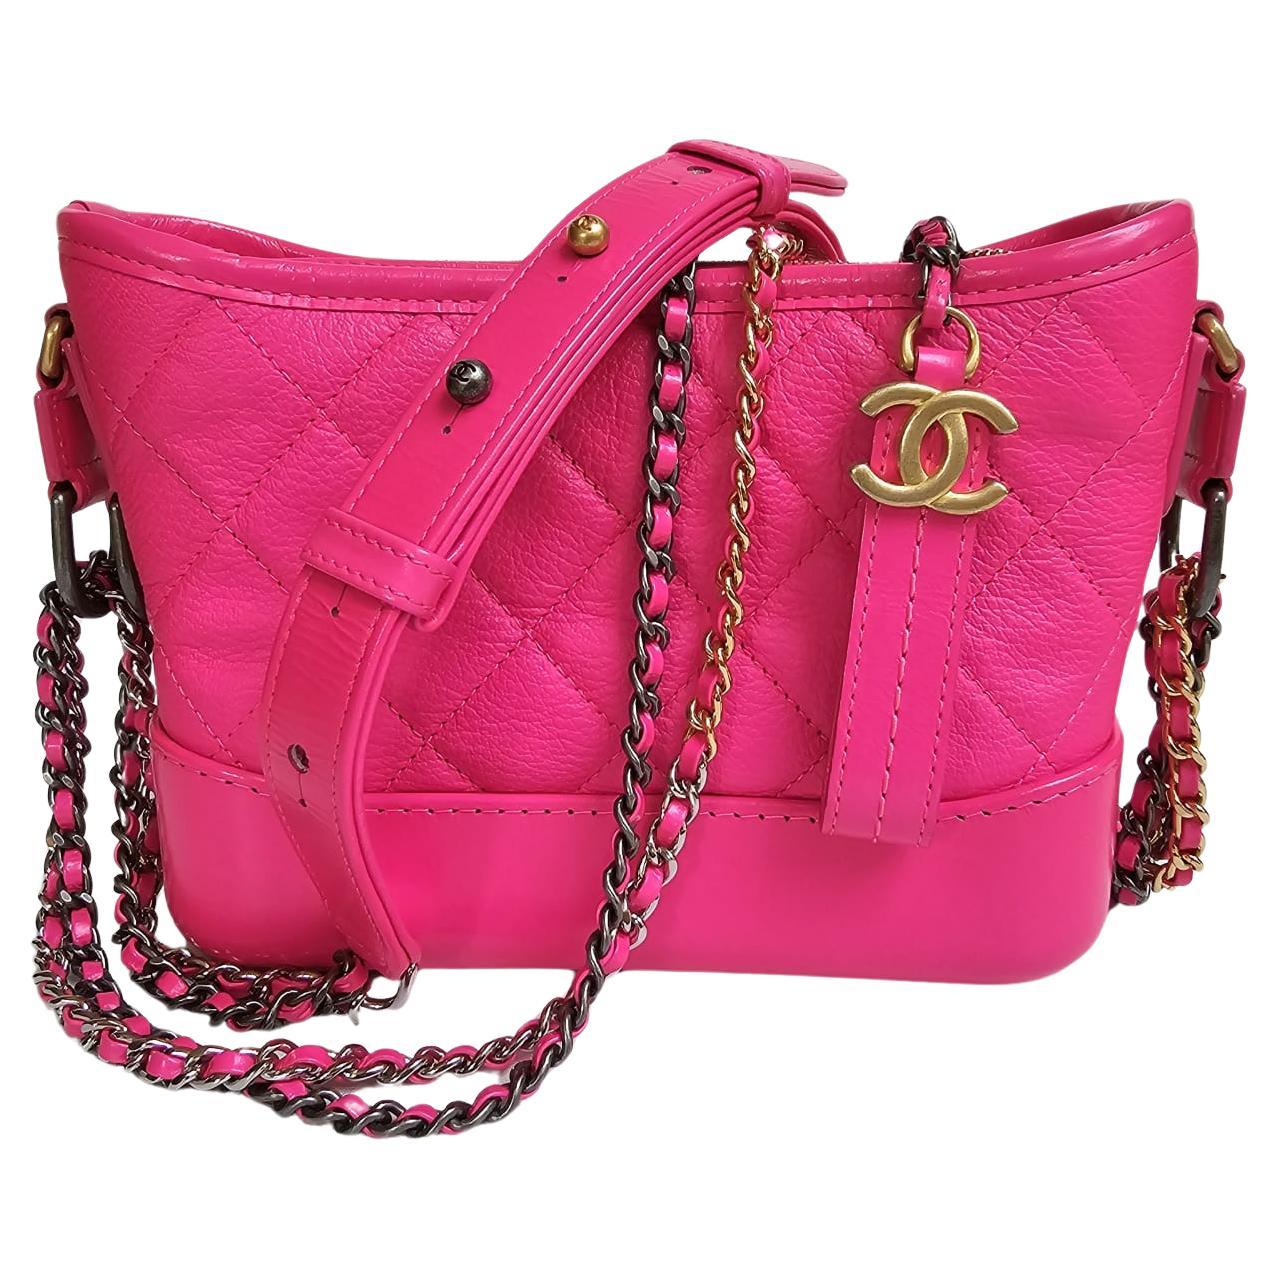 Chanel Neon Pink Small Gabrielle Bag For Sale